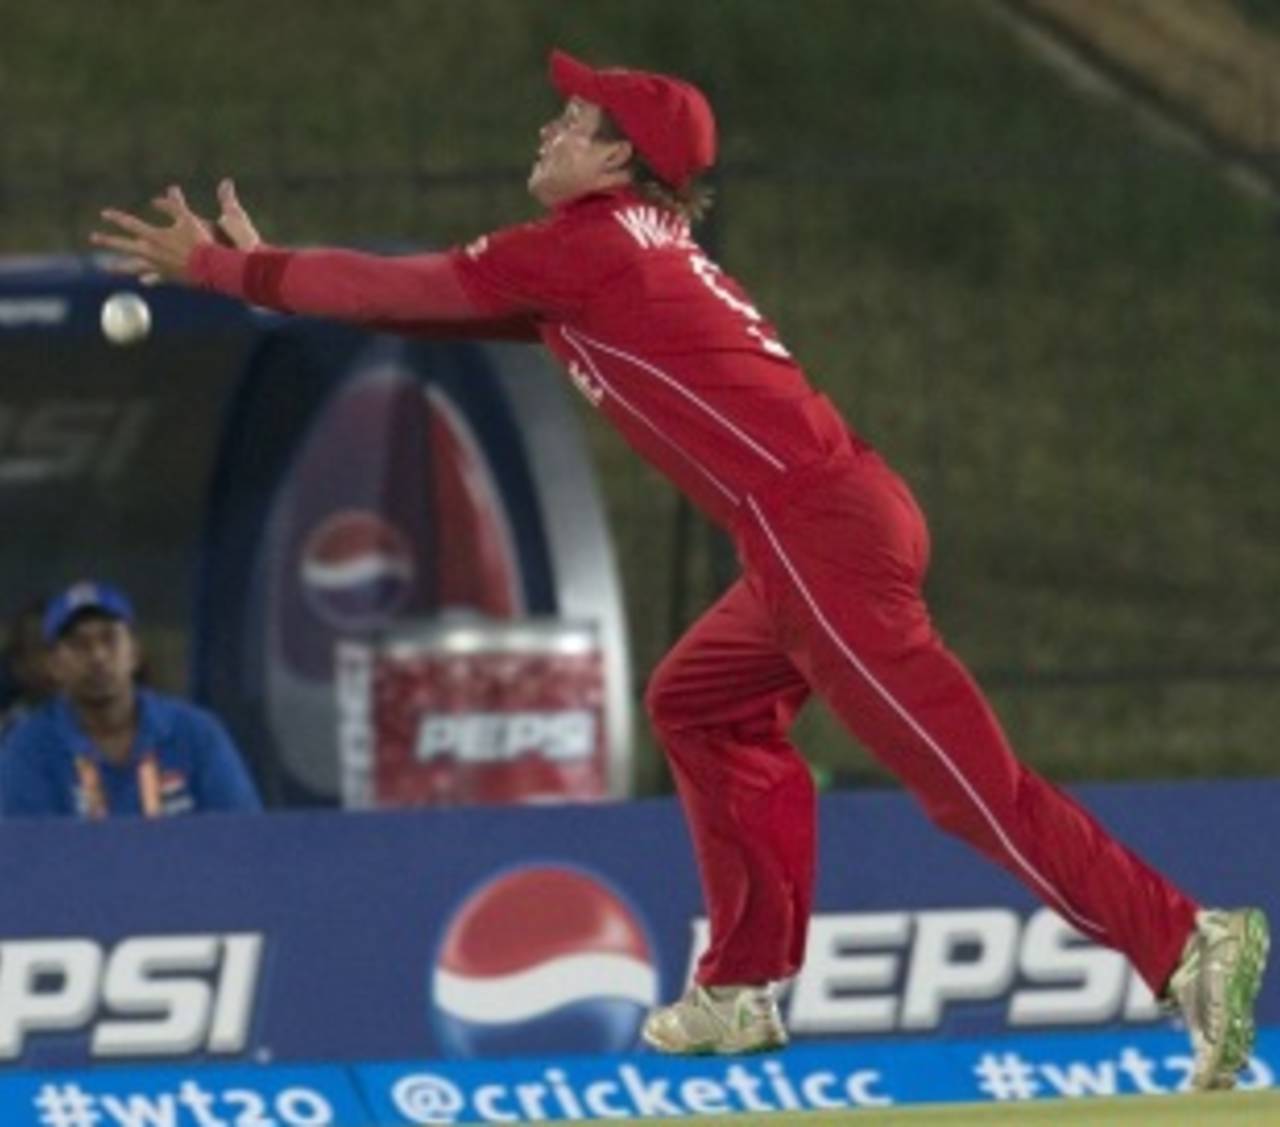 Zimbabwe's batting and bowling needs all the help it can get - and that didn't happen in the field on Tuesday&nbsp;&nbsp;&bull;&nbsp;&nbsp;Associated Press